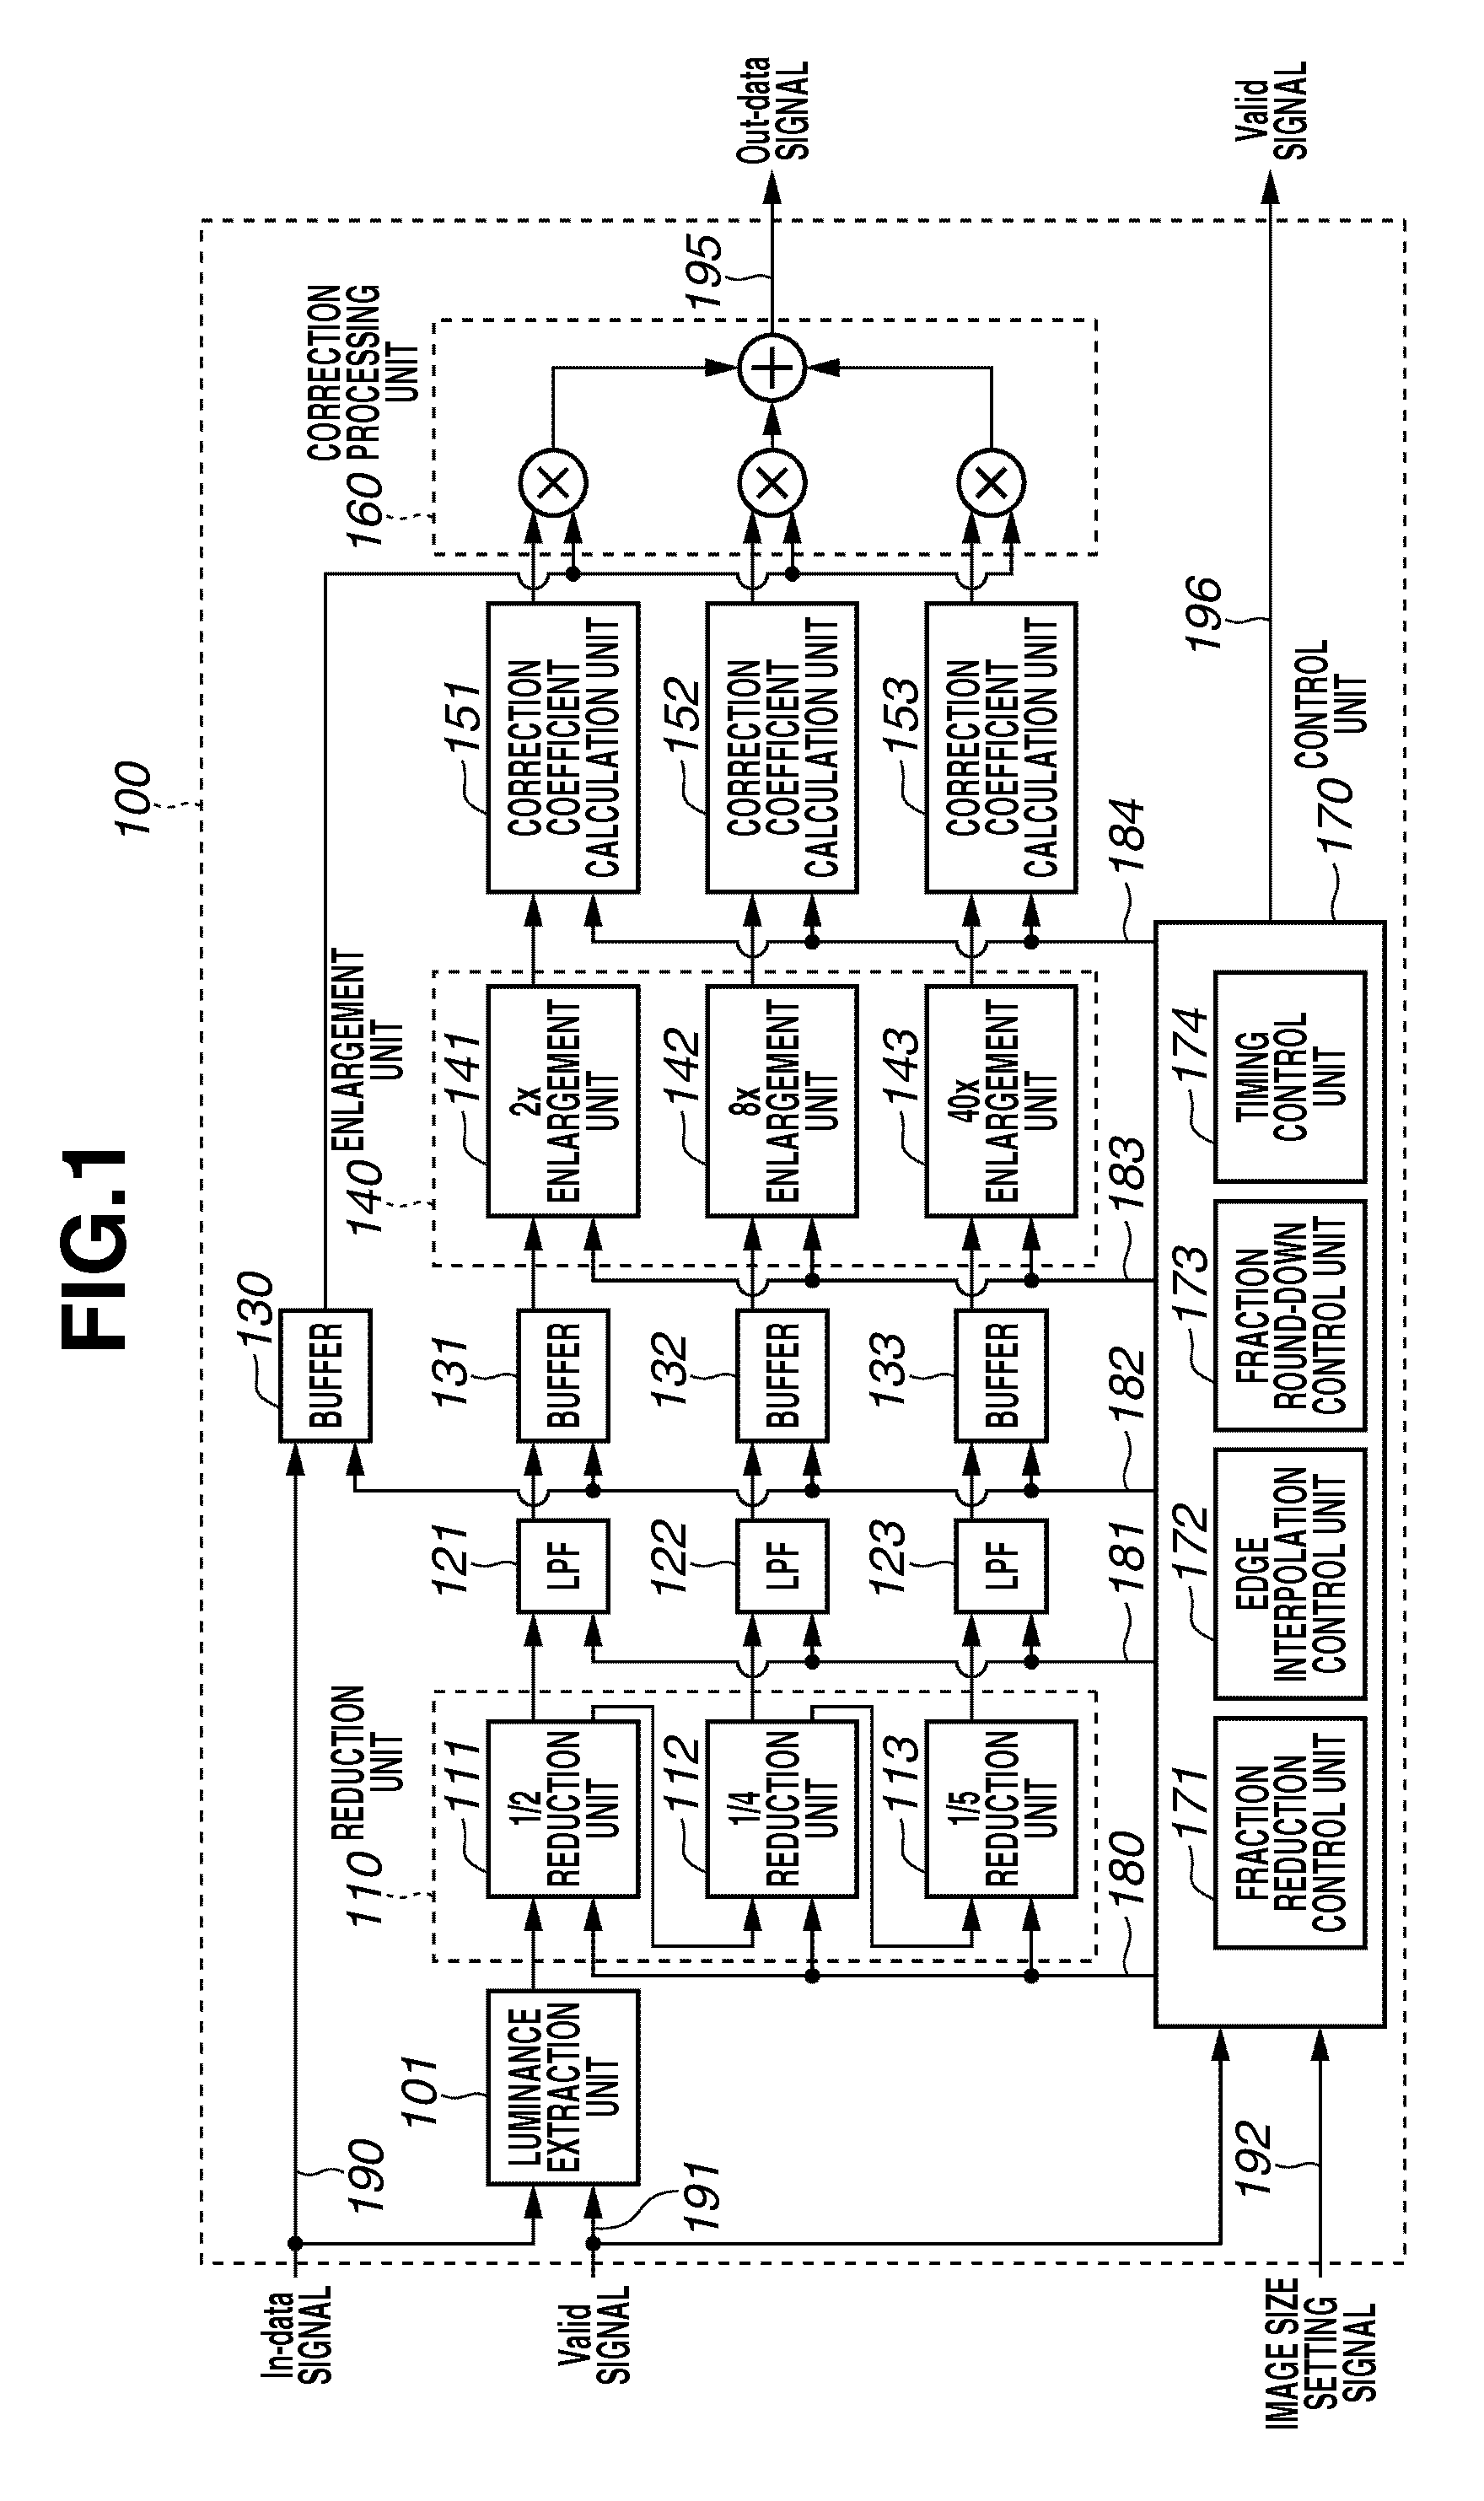 Image correction apparatus and method